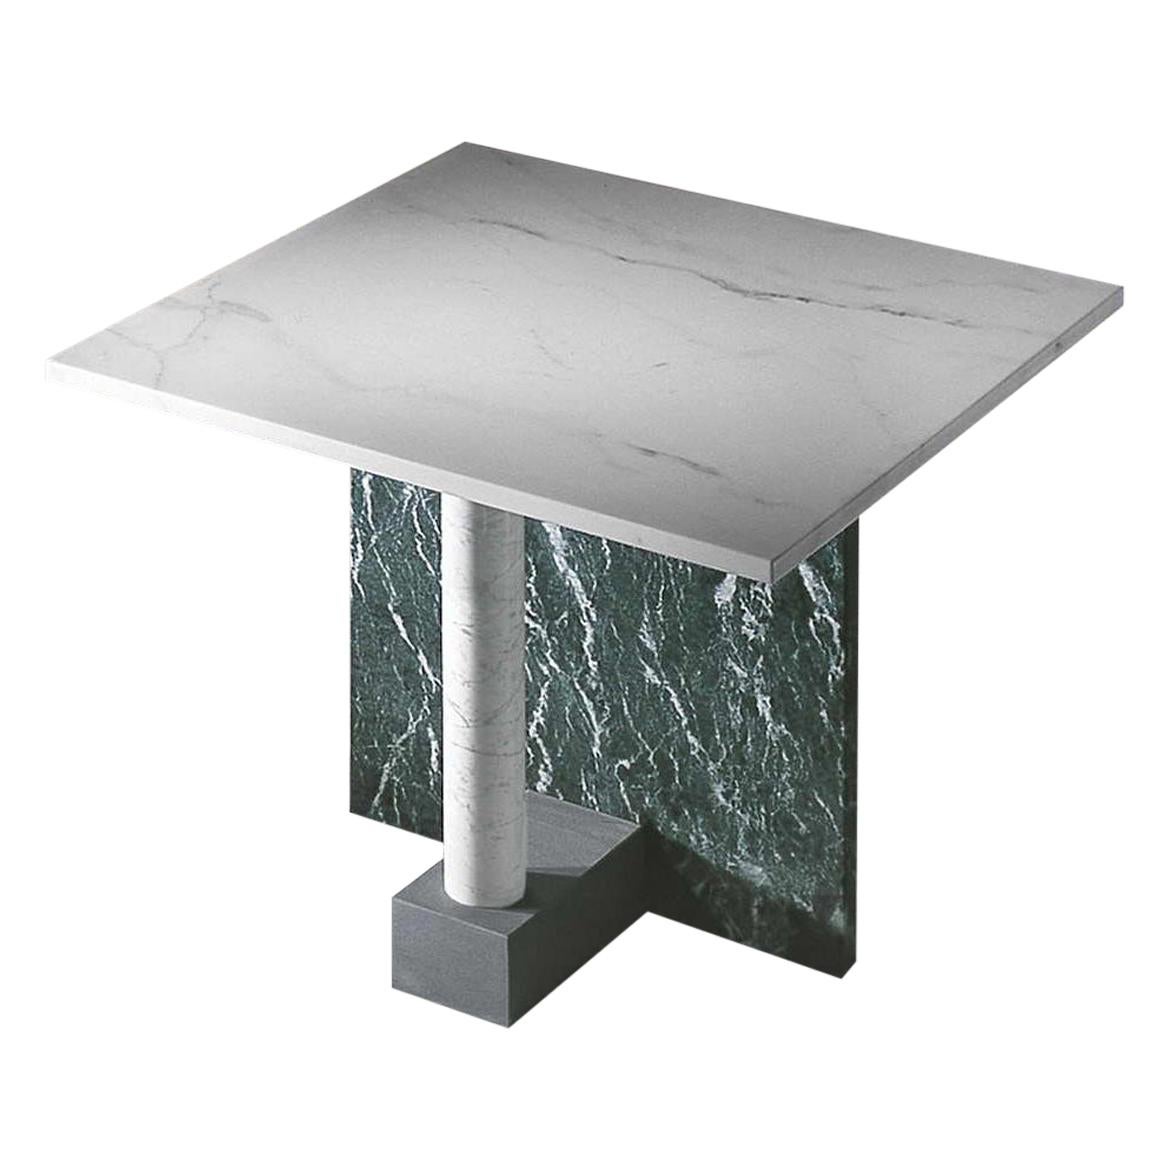 21st Century by Arch. M.Zanini "MESAVERDE" Square Marble Coffee Table